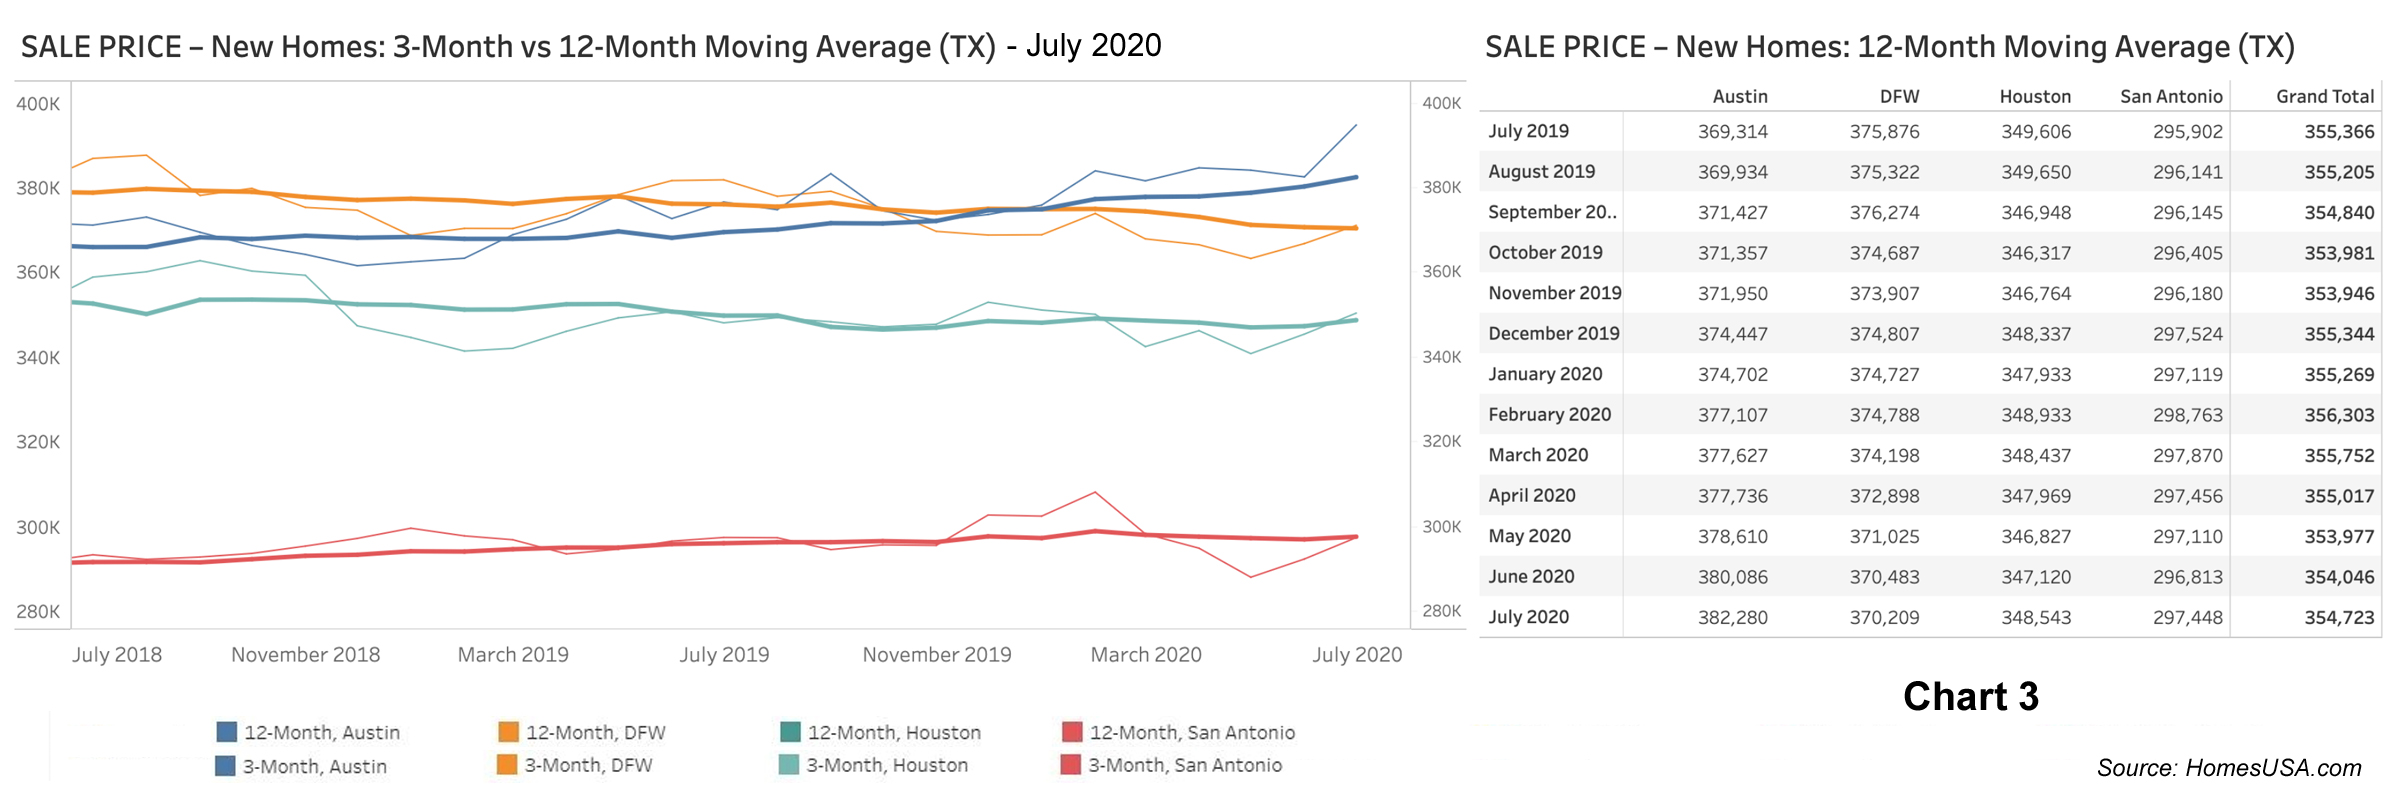 Chart 3: Texas New Home Prices - July 2020